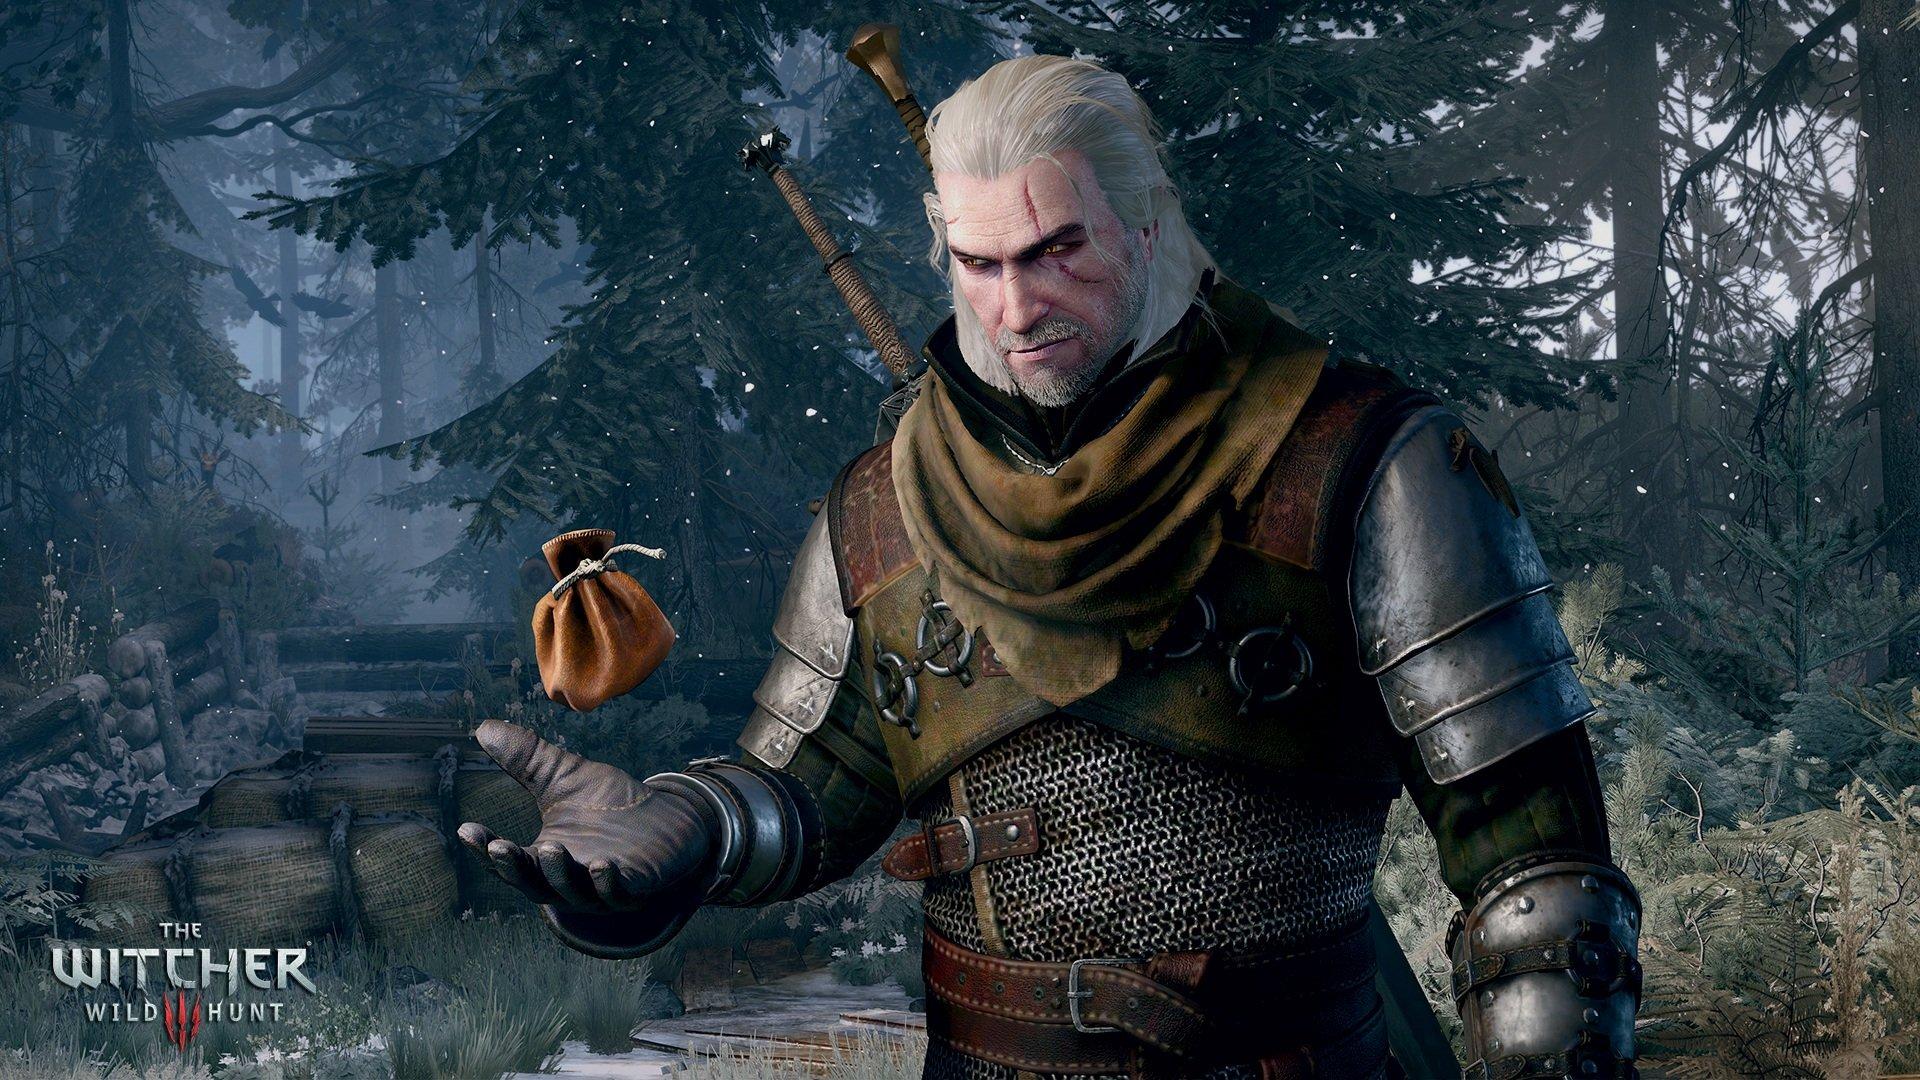 Download Now The Witcher 3 Patch 1.10 Across PC, PS4, Xbox One